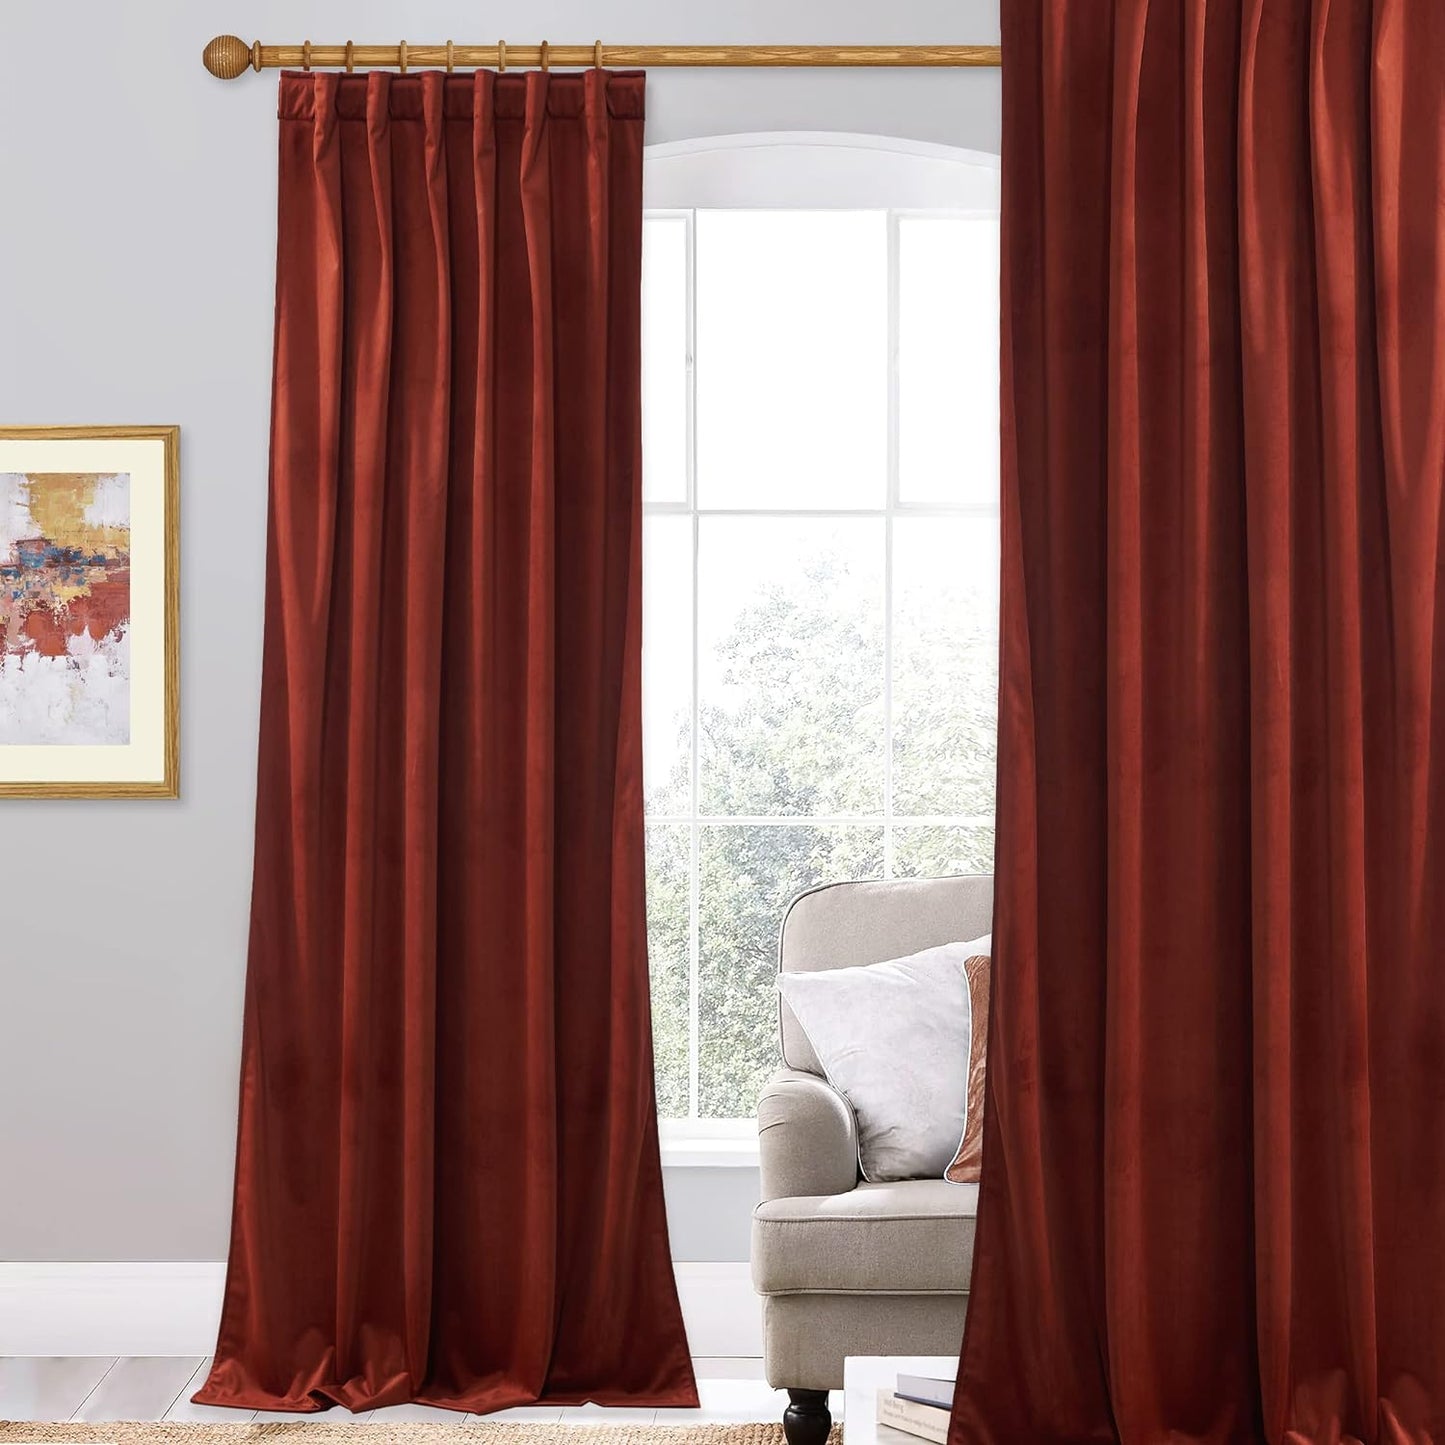 Stangh Navy Blue Velvet Curtains 96 Inches Long for Living Room, Luxury Blackout Sliding Door Curtains Thermal Insulated Window Drapes for Bedroom, W52 X L96 Inches, 1 Panel  StangH Rust W52 X L84 